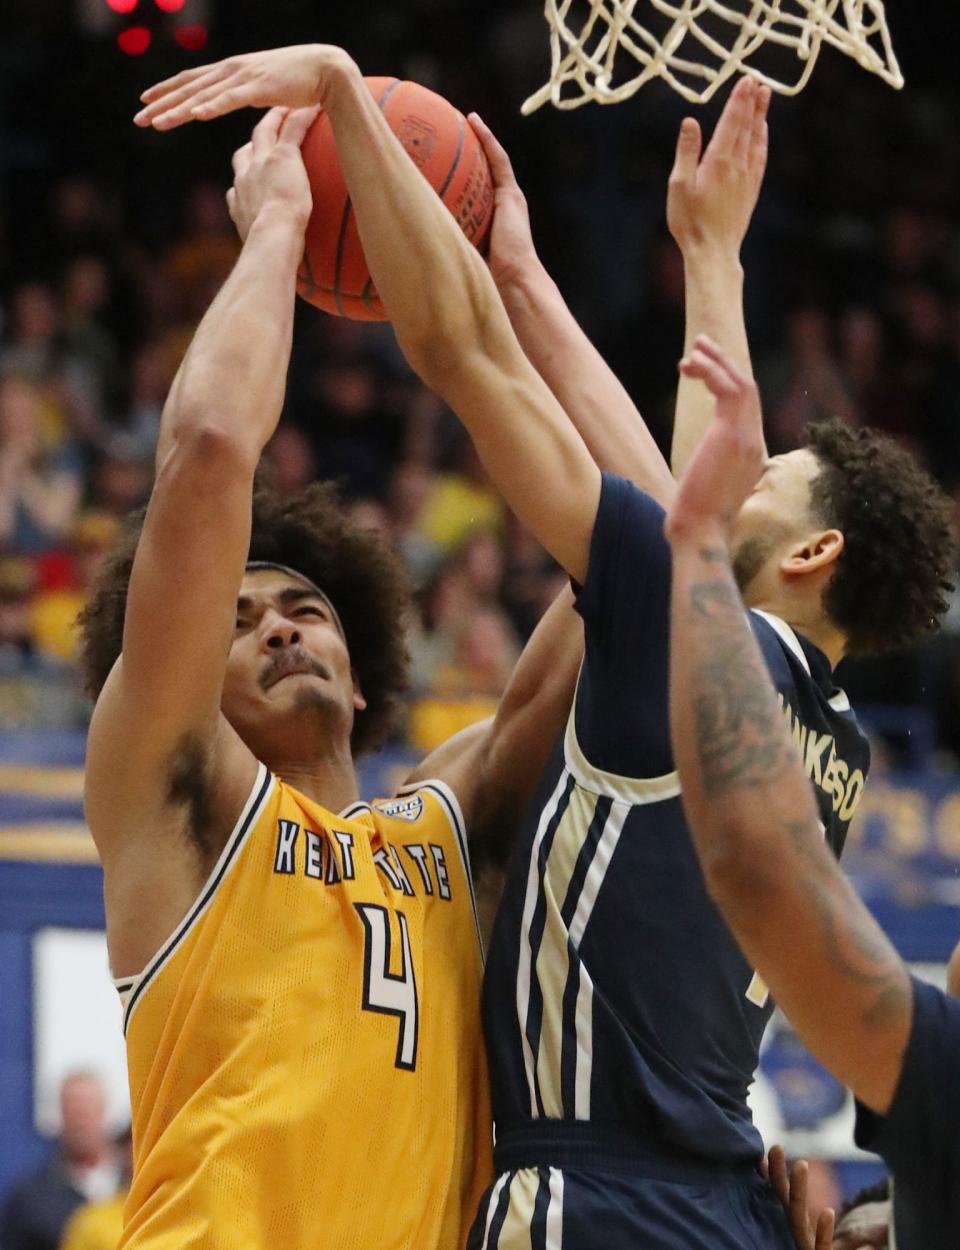 Kent State's Chris Payton goes to the hoop as Akron's Trendon Hankerson defends during Friday night at the M.A.C. Center in Kent.